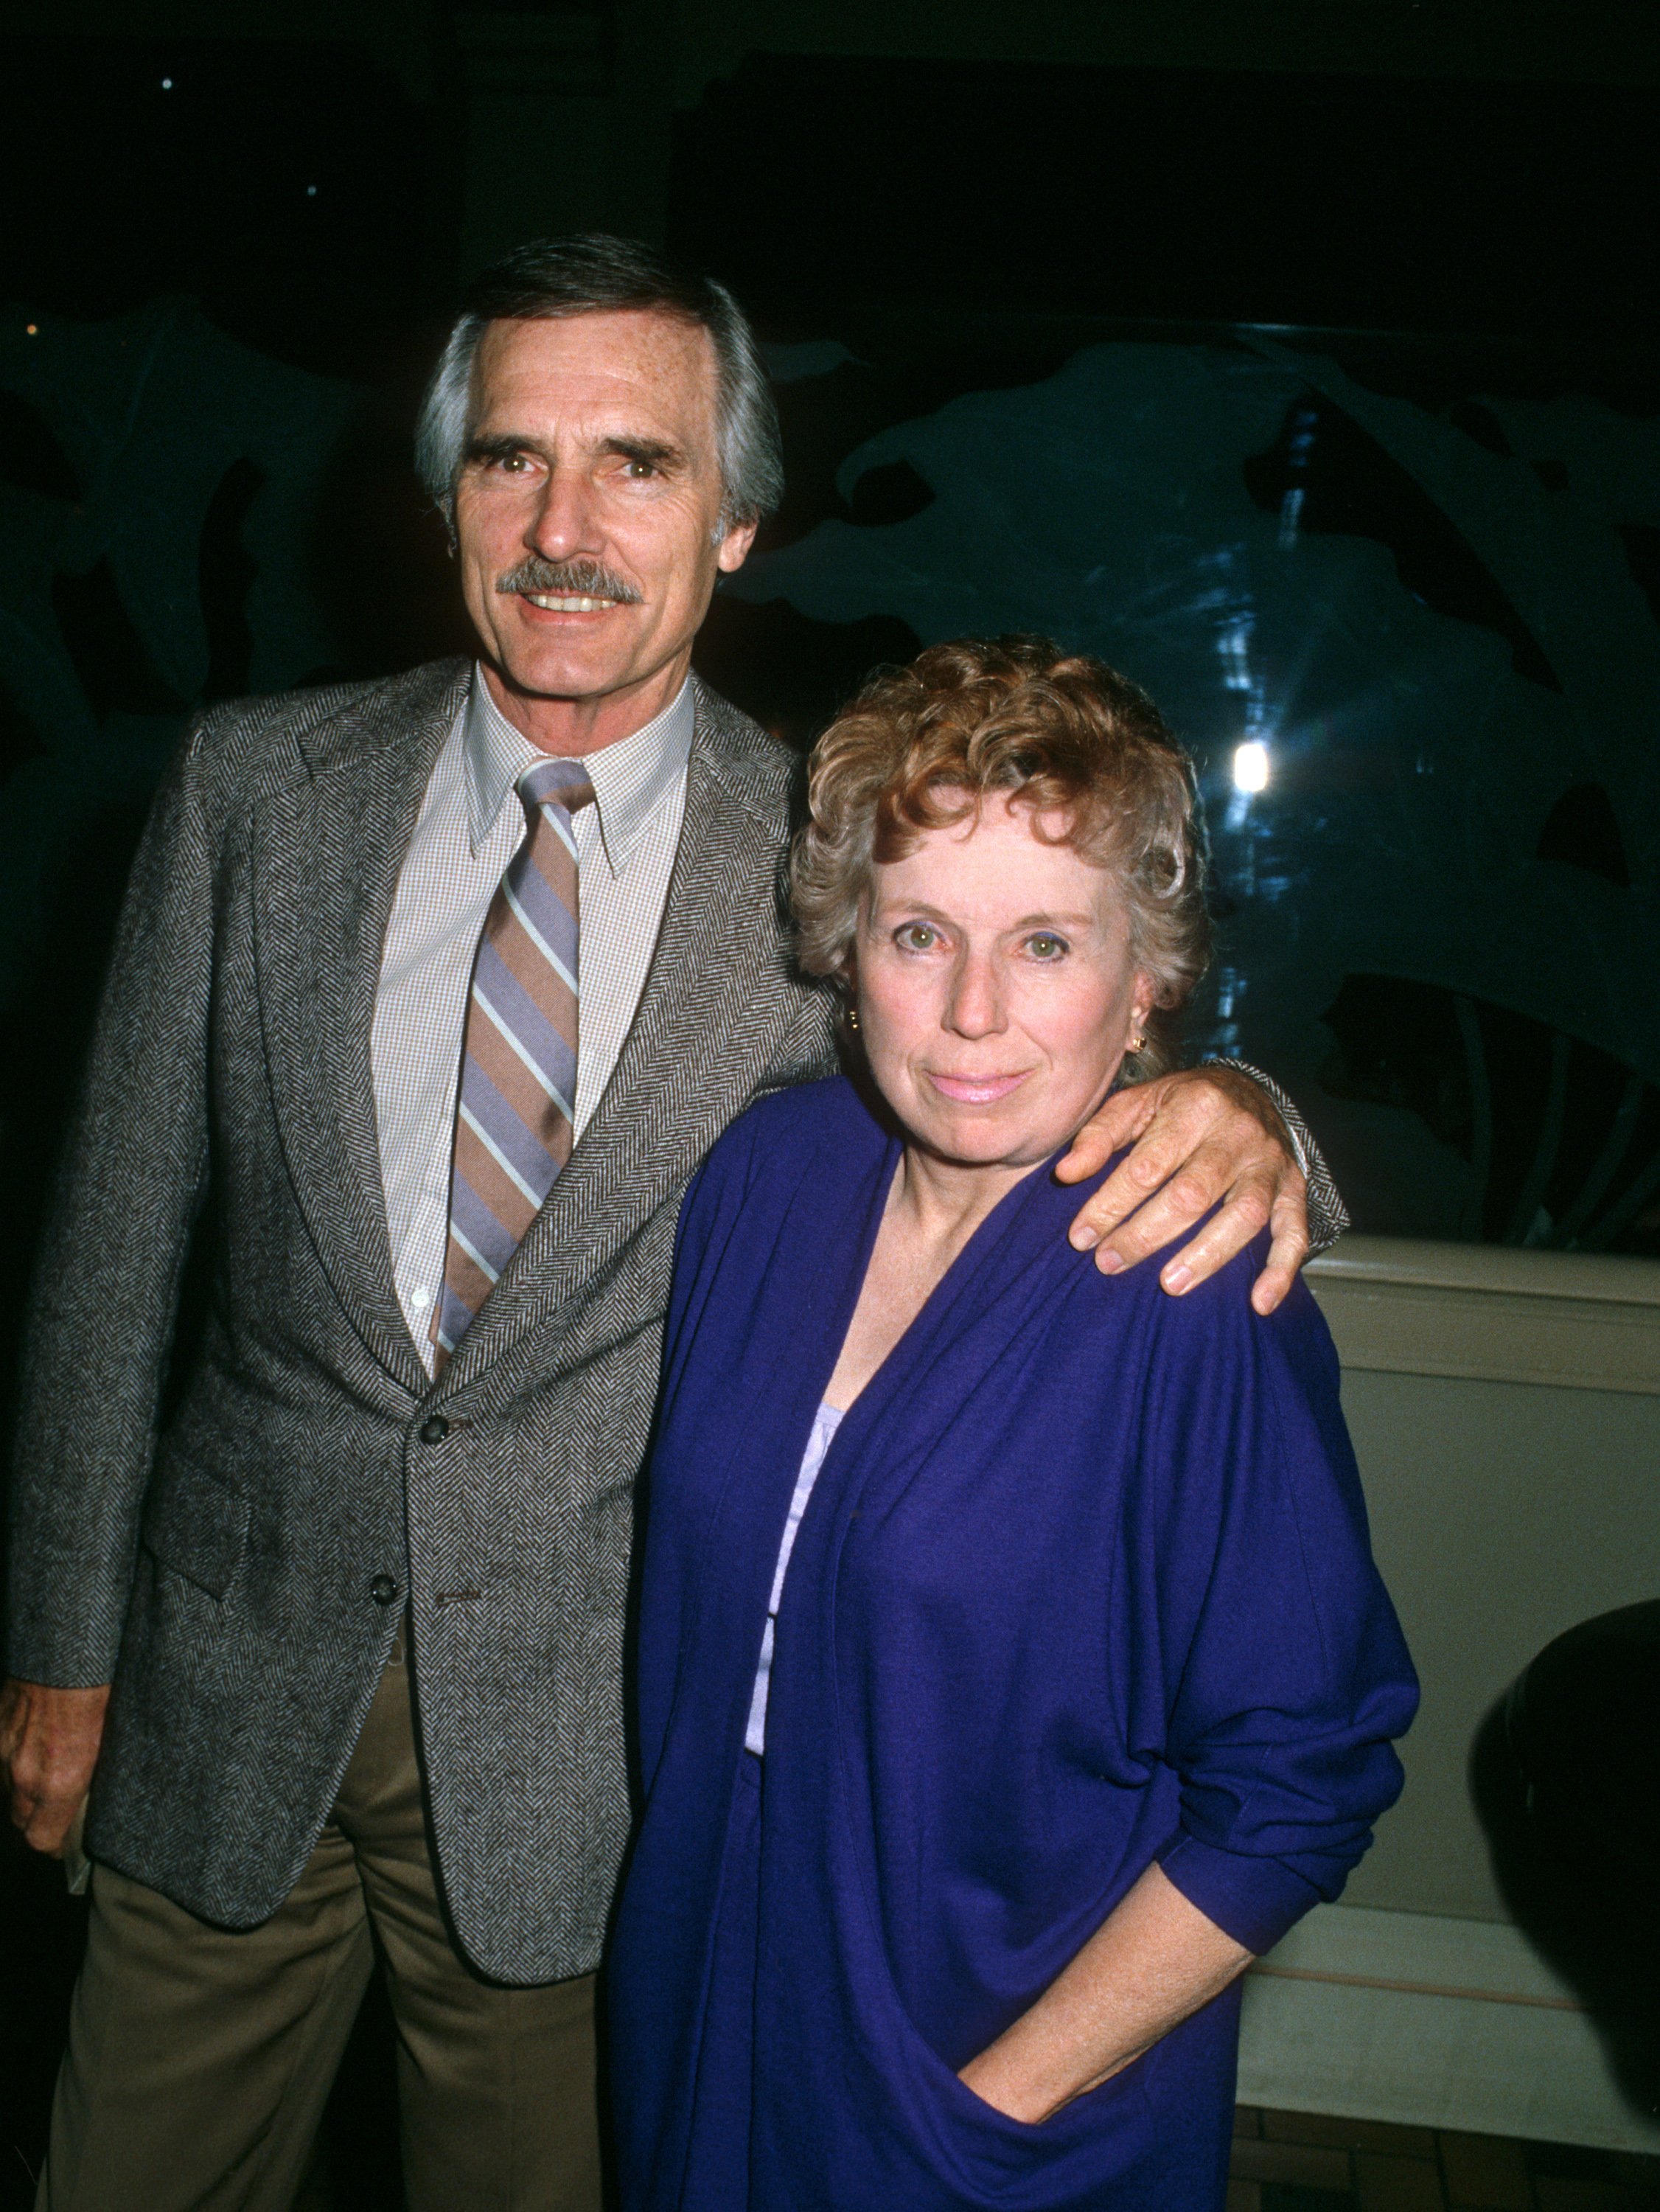 Dennis Weaver and Gerry Weaver during Dennis Weaver Sighting at Century Plaza Hotel on May 6, 1984 in Century Plaza, California. / Source: Getty Images